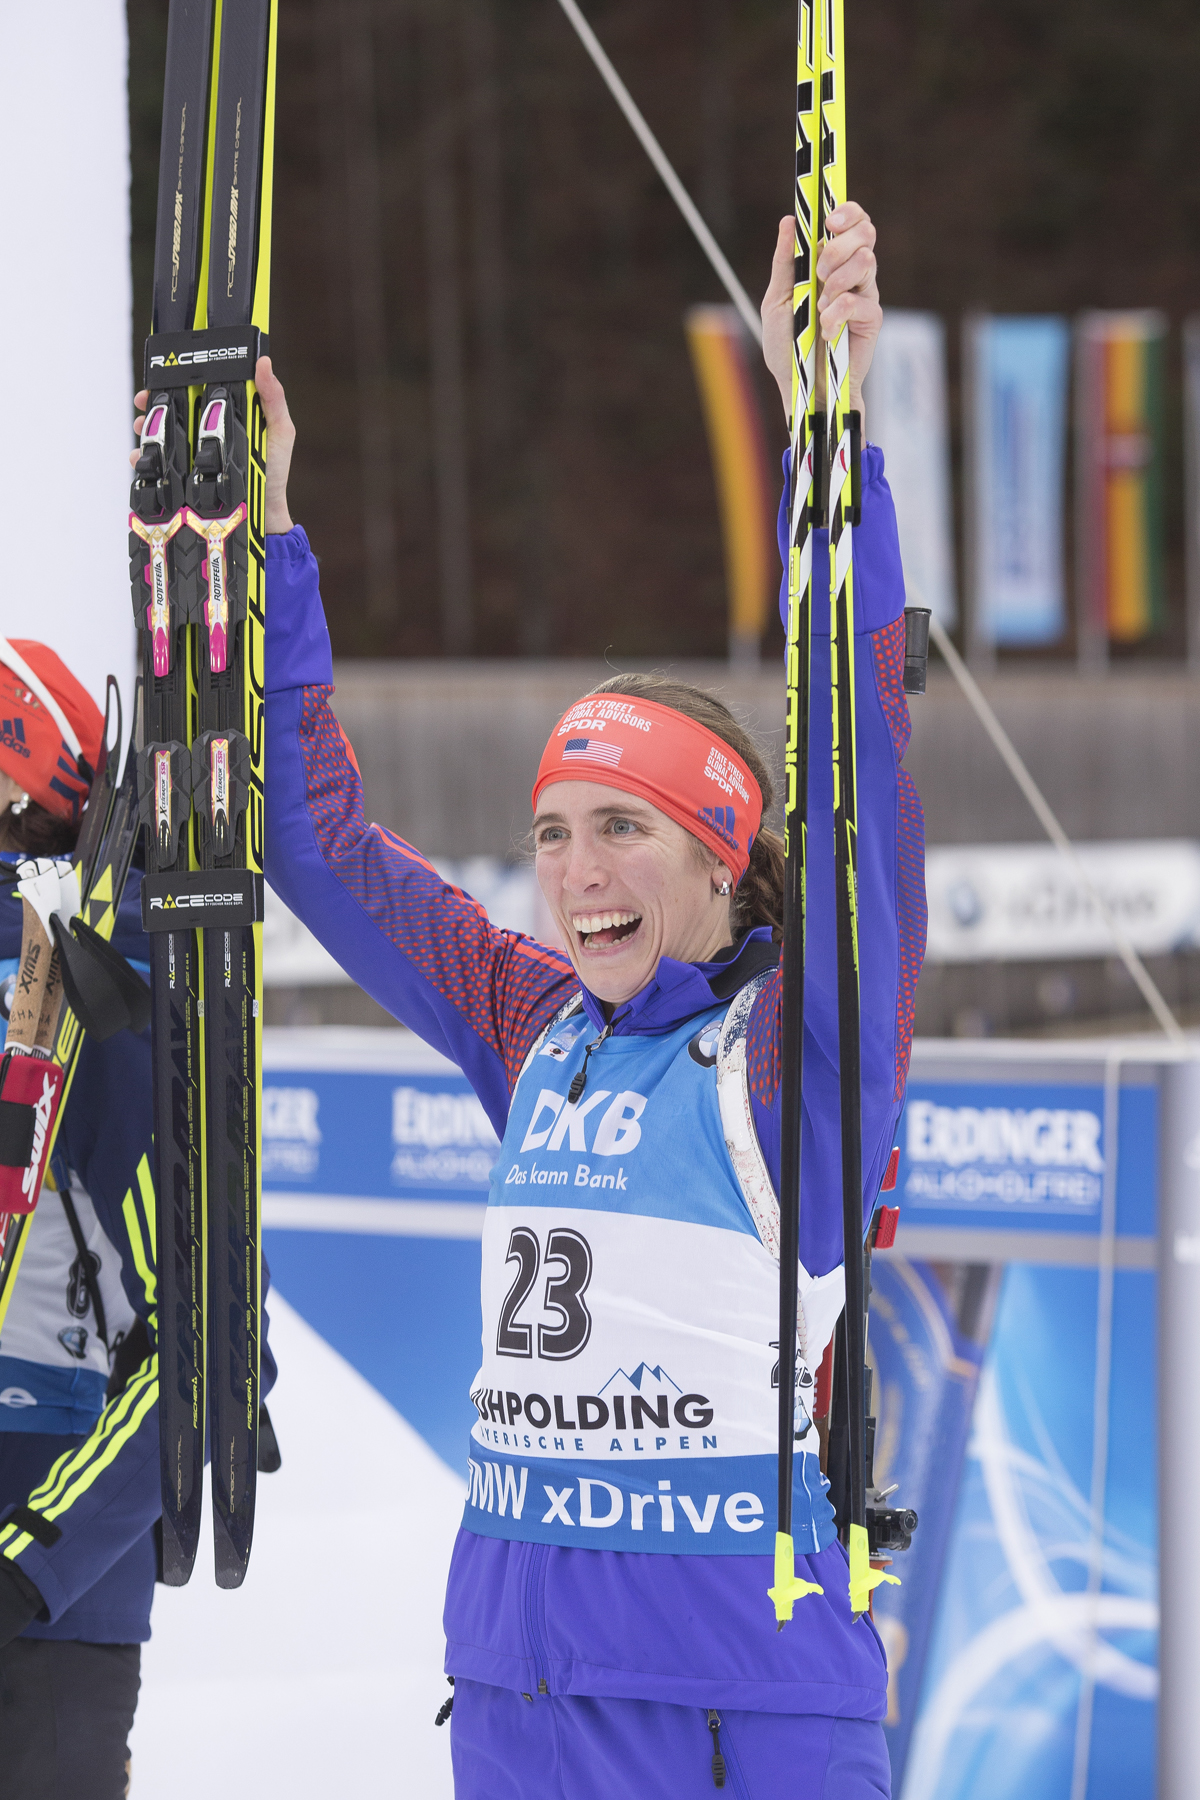 Susan Dunklee (US Biathlon) at the flower ceremony for last Sunday's mass start in Ruhpolding, where she finished sixth. This time around it was 22nd. " I'll be looking to find that good feeling on the range again like I had last week.  It's there, I know it is," she wrote. (Photo: Fischer/NordicFocus)